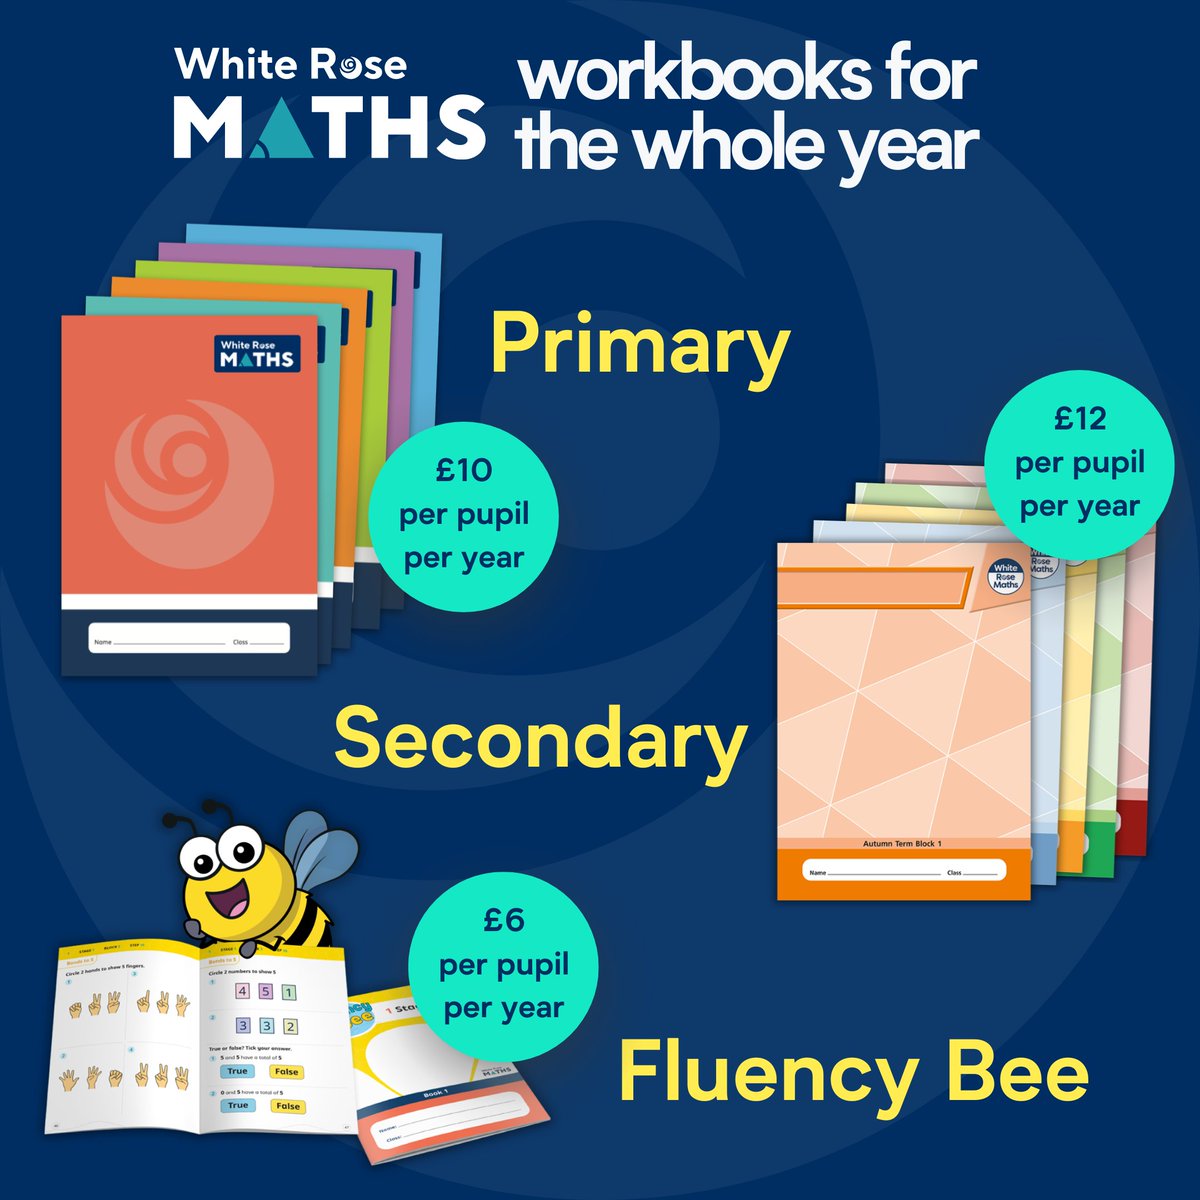 Thinking maths? Think White Rose! We have all your workbook needs covered - whether it's primary, secondary or extra fluency practice 🐝 Get the best deals on annual orders and get sorted for the whole year 📚 Order workbooks now: eu1.hubs.ly/H0960100